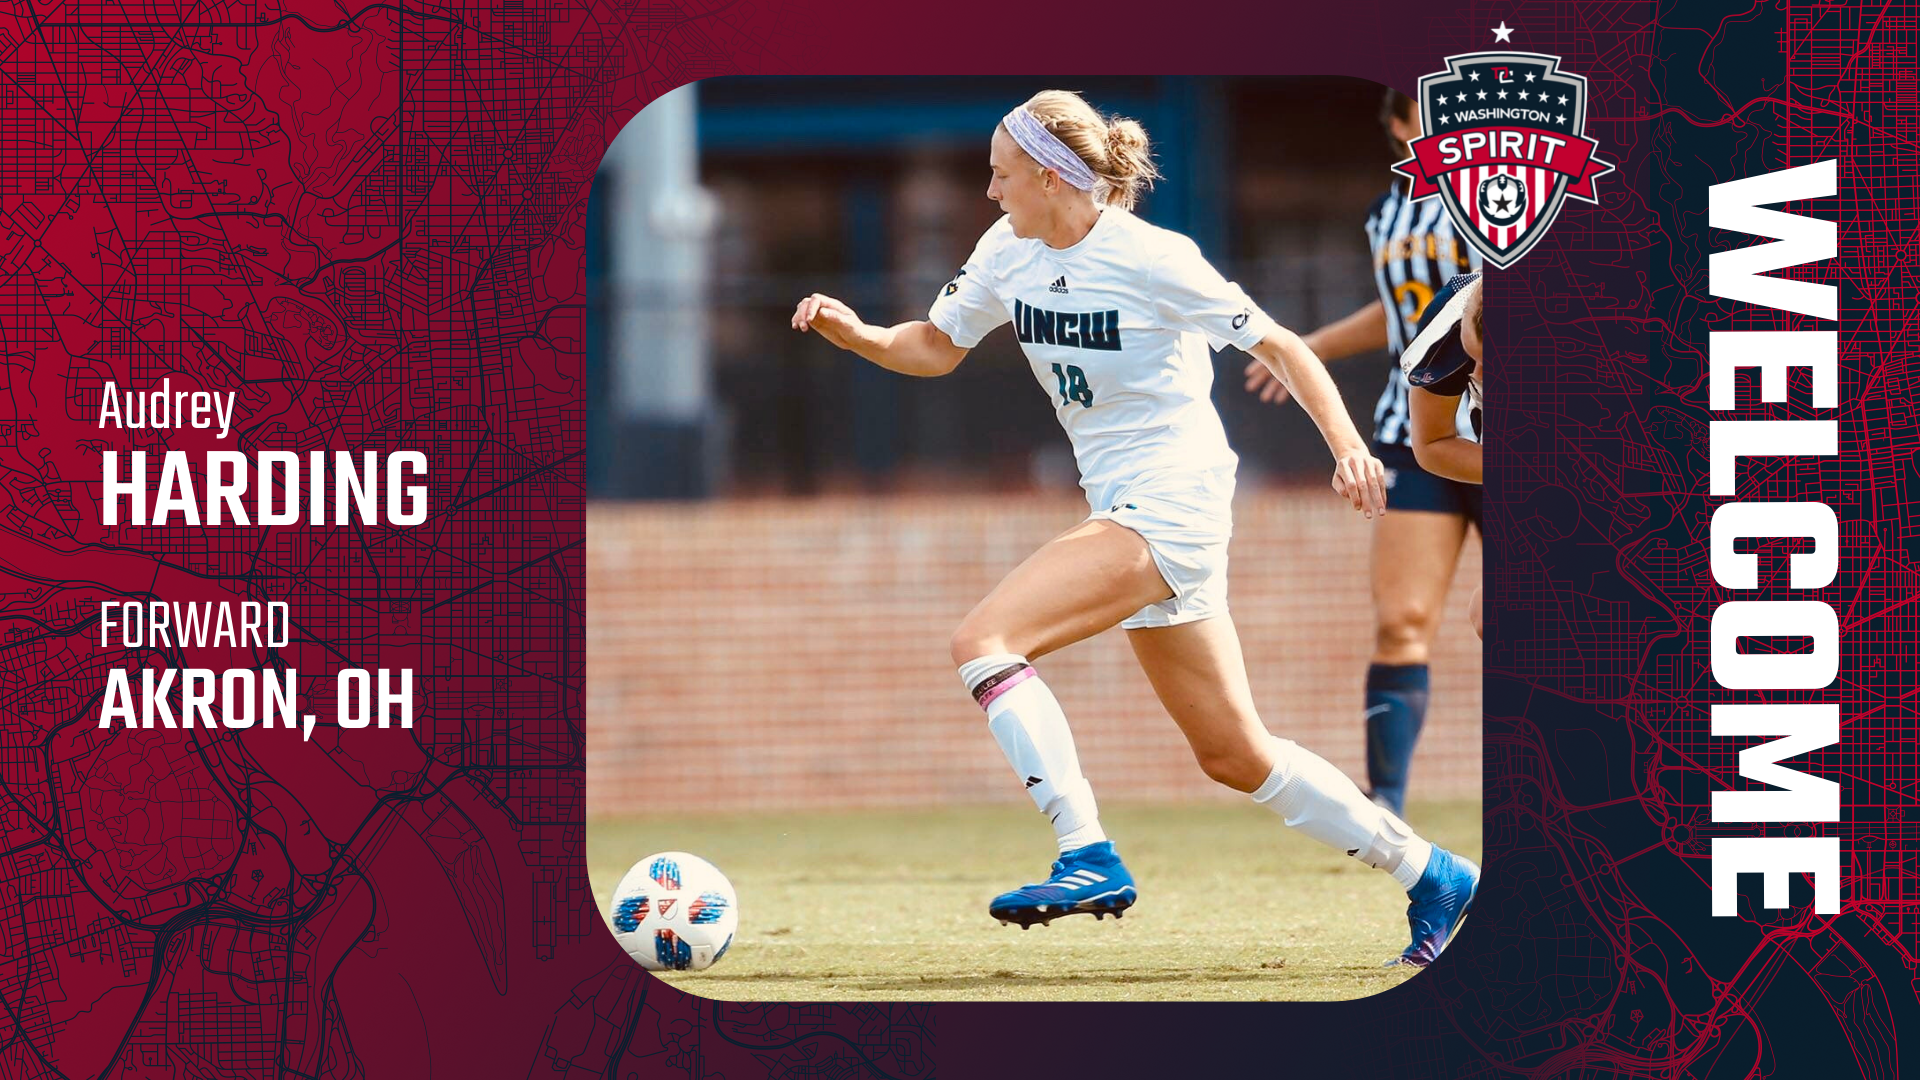 Washington Spirit select Audrey Harding 38th overall in the 2022 NWSL Draft Featured Image